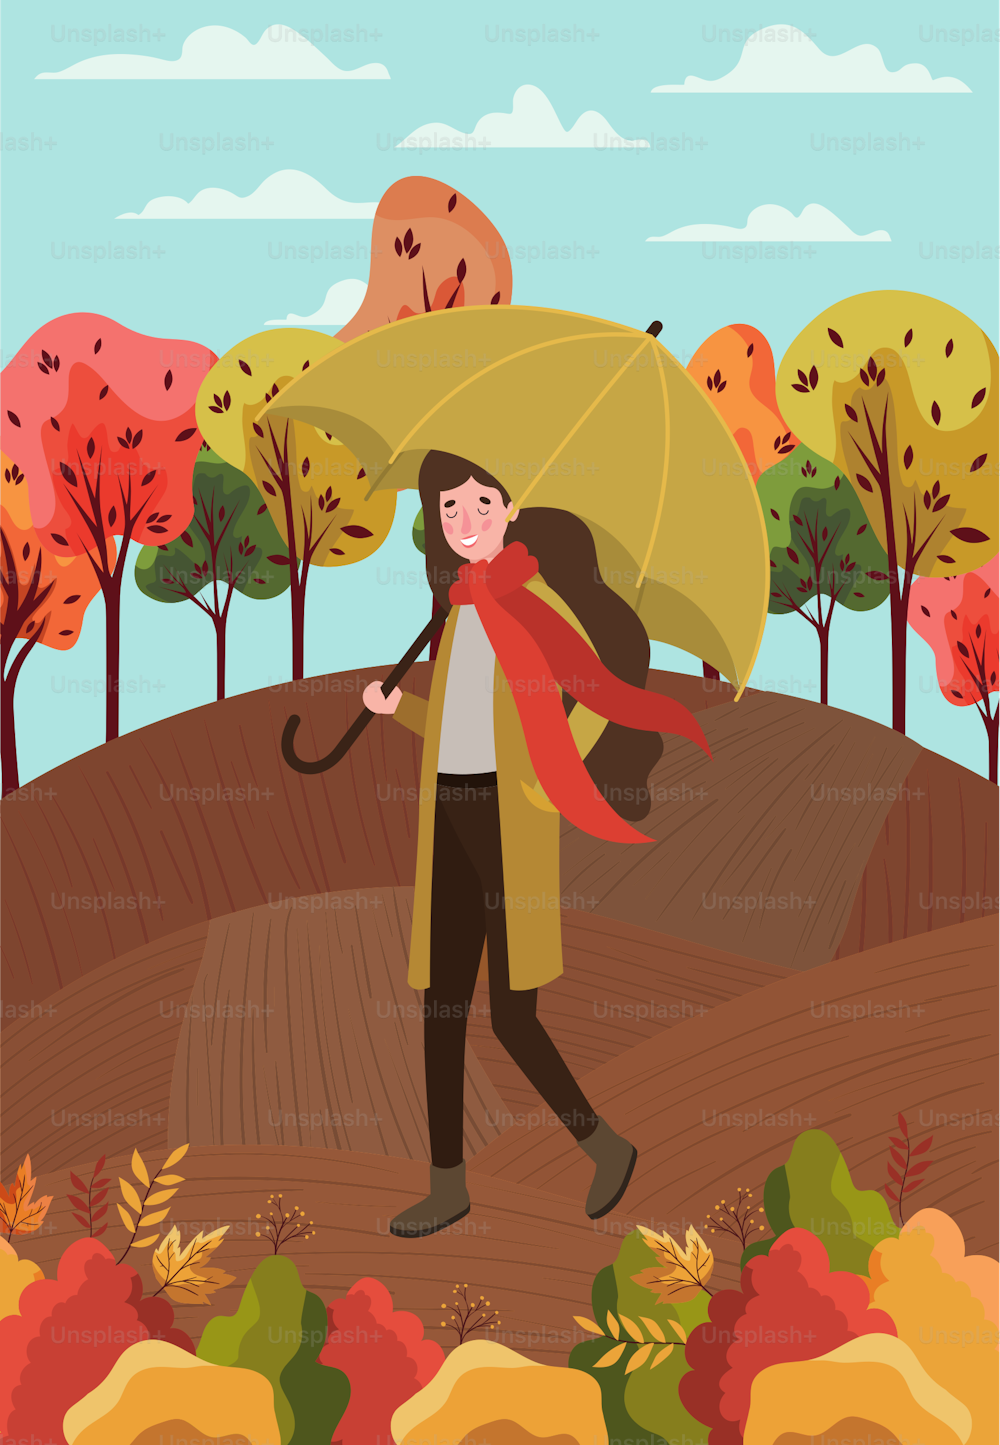 man with autumn suit and umbrella in the camp character vector illustration design